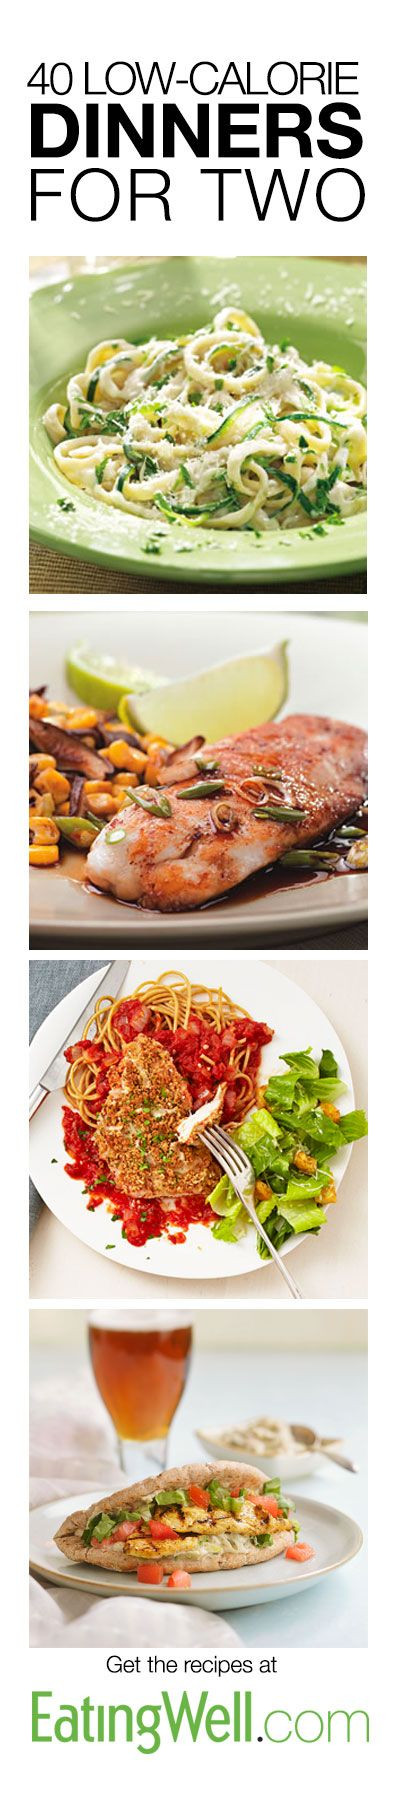 Low Calorie Dinners For 2
 Best 25 Low calorie dinners ideas on Pinterest